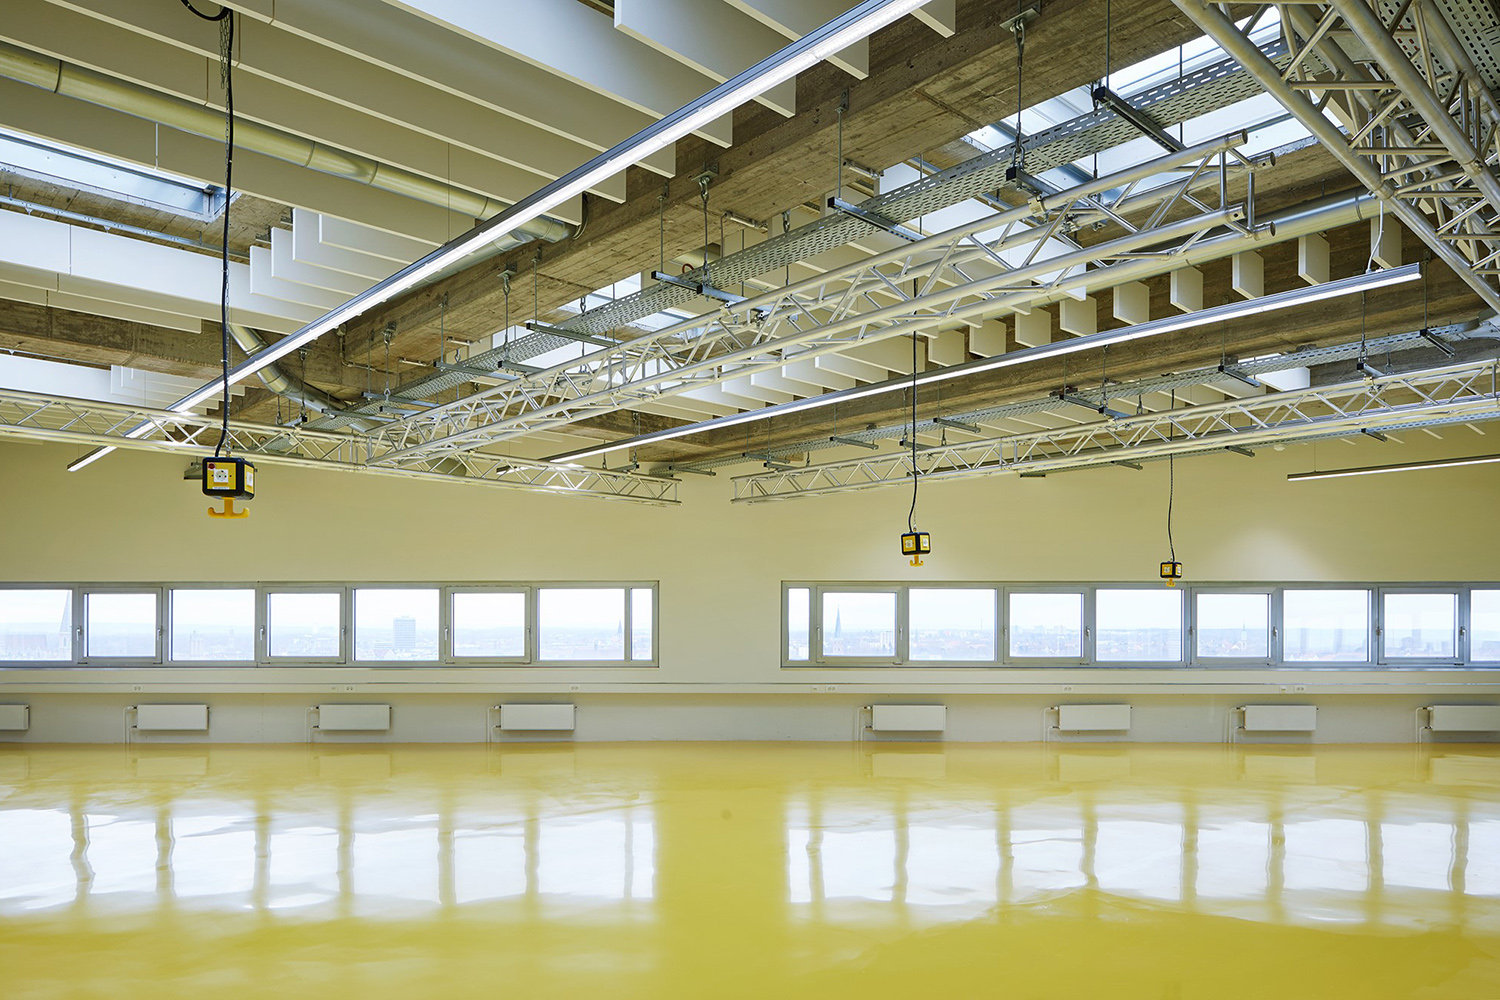 Striking: The bright yellow floor creates a feeling of energy and light in the ISU Space Lab. Photo credit: (c) Noshe